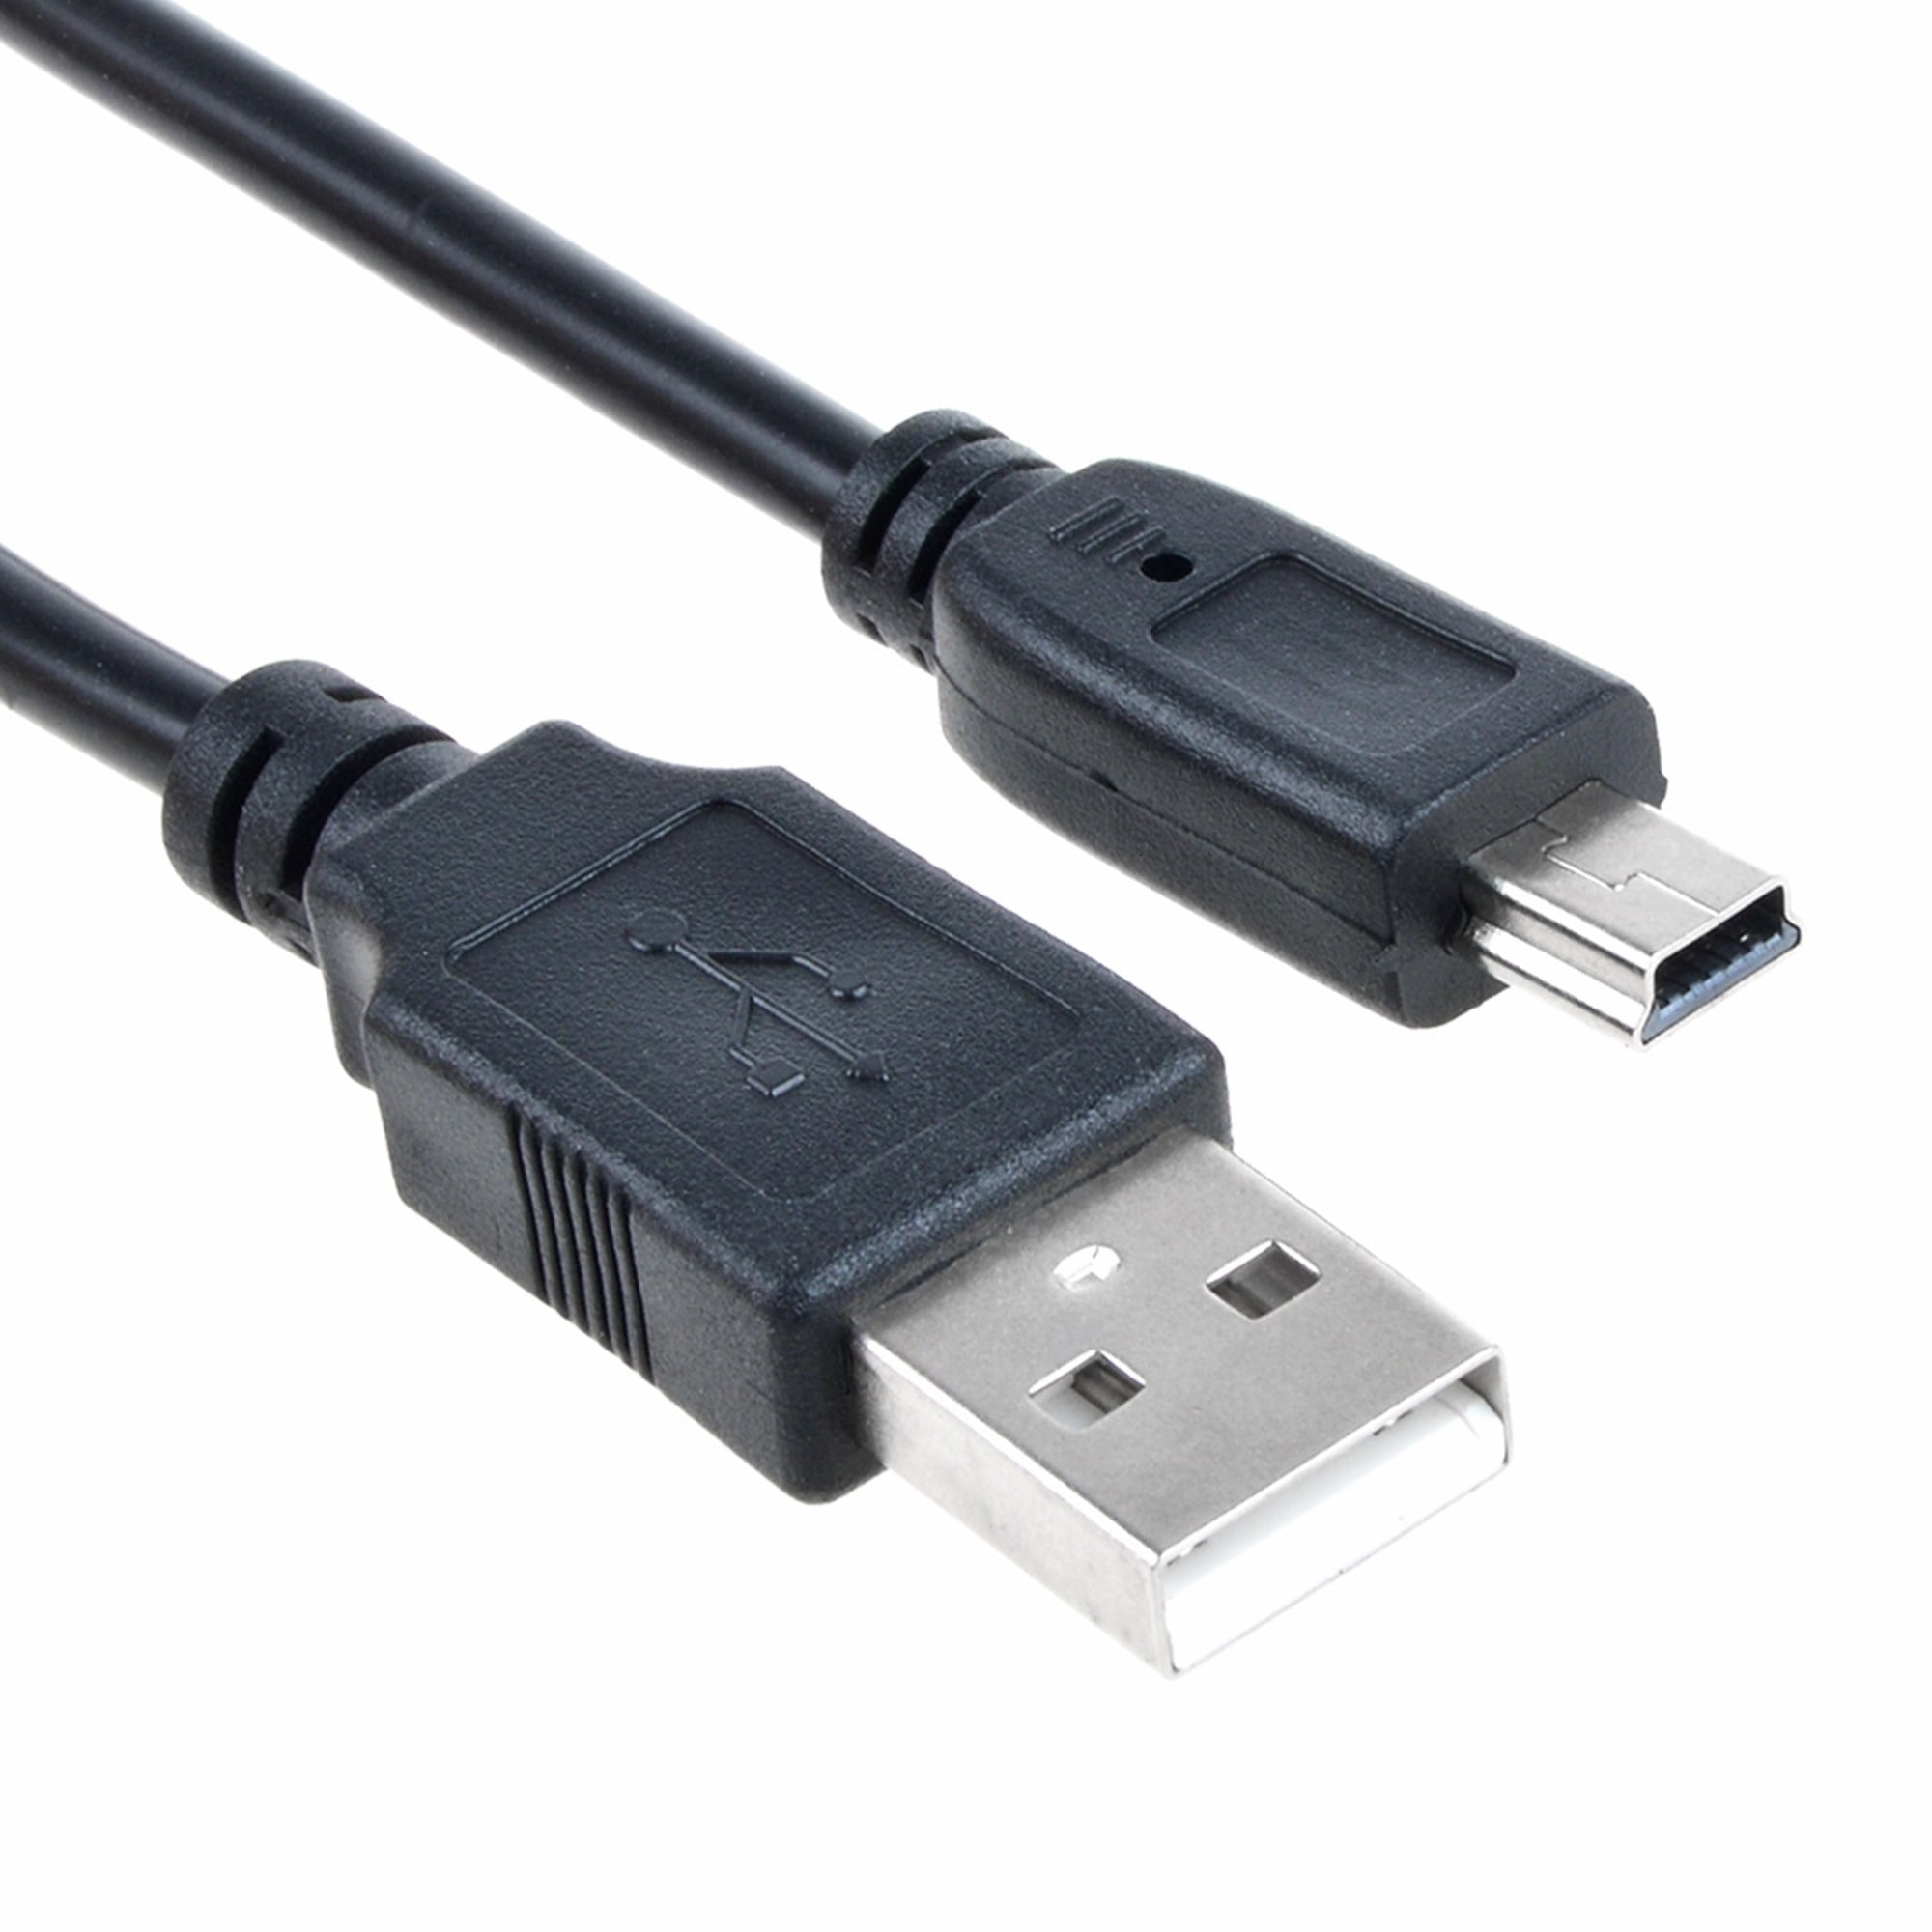 6ft Micro USB Data Cable for LG DLC100 LX400 Lotus LX600 Power Charger Cord 